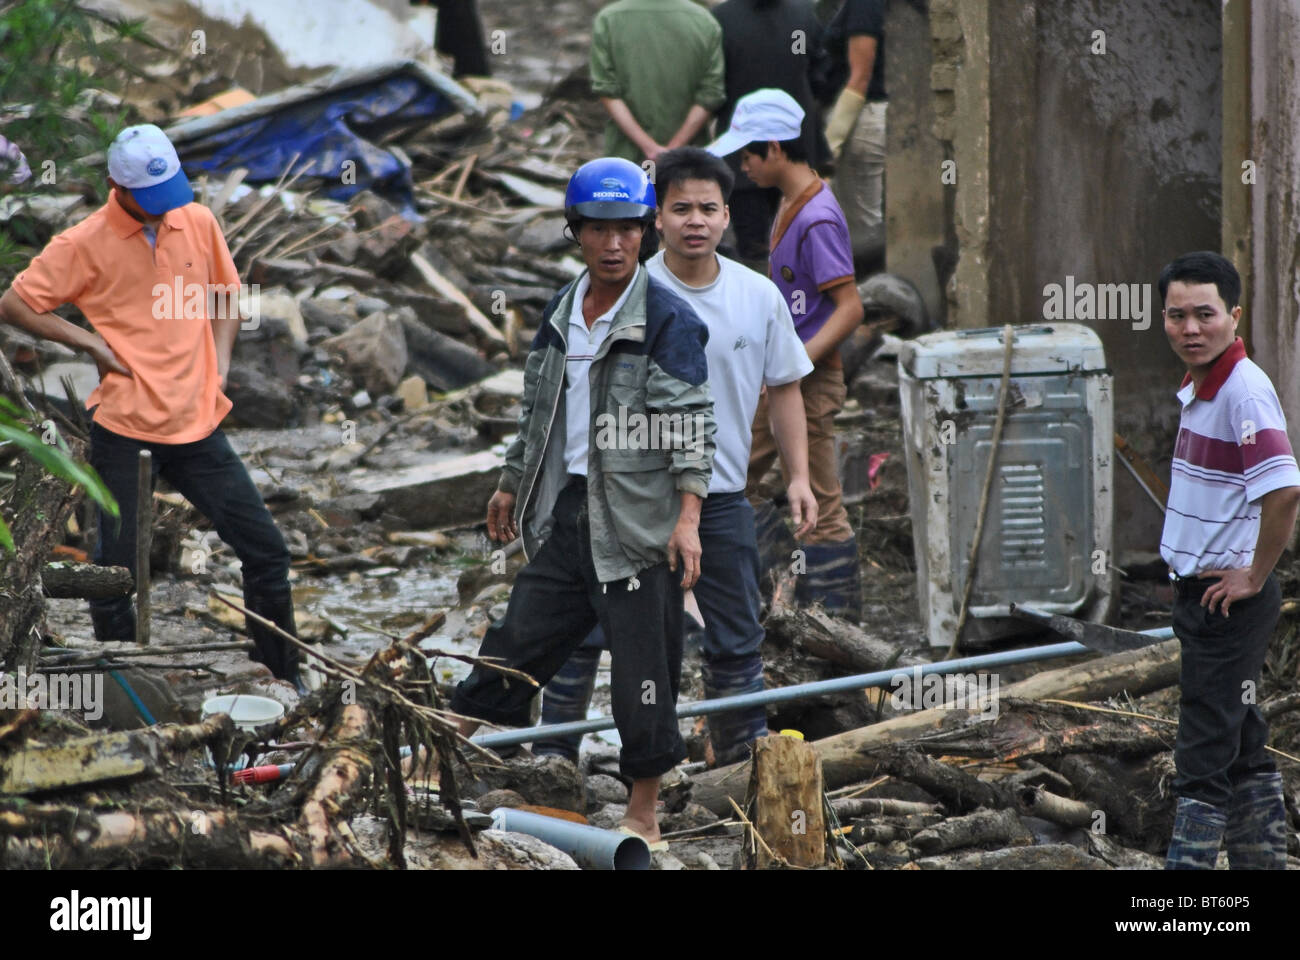 Workers clear debris from the scene of a mudslide triggered by heavy rain near Sapa, Vietnam Stock Photo